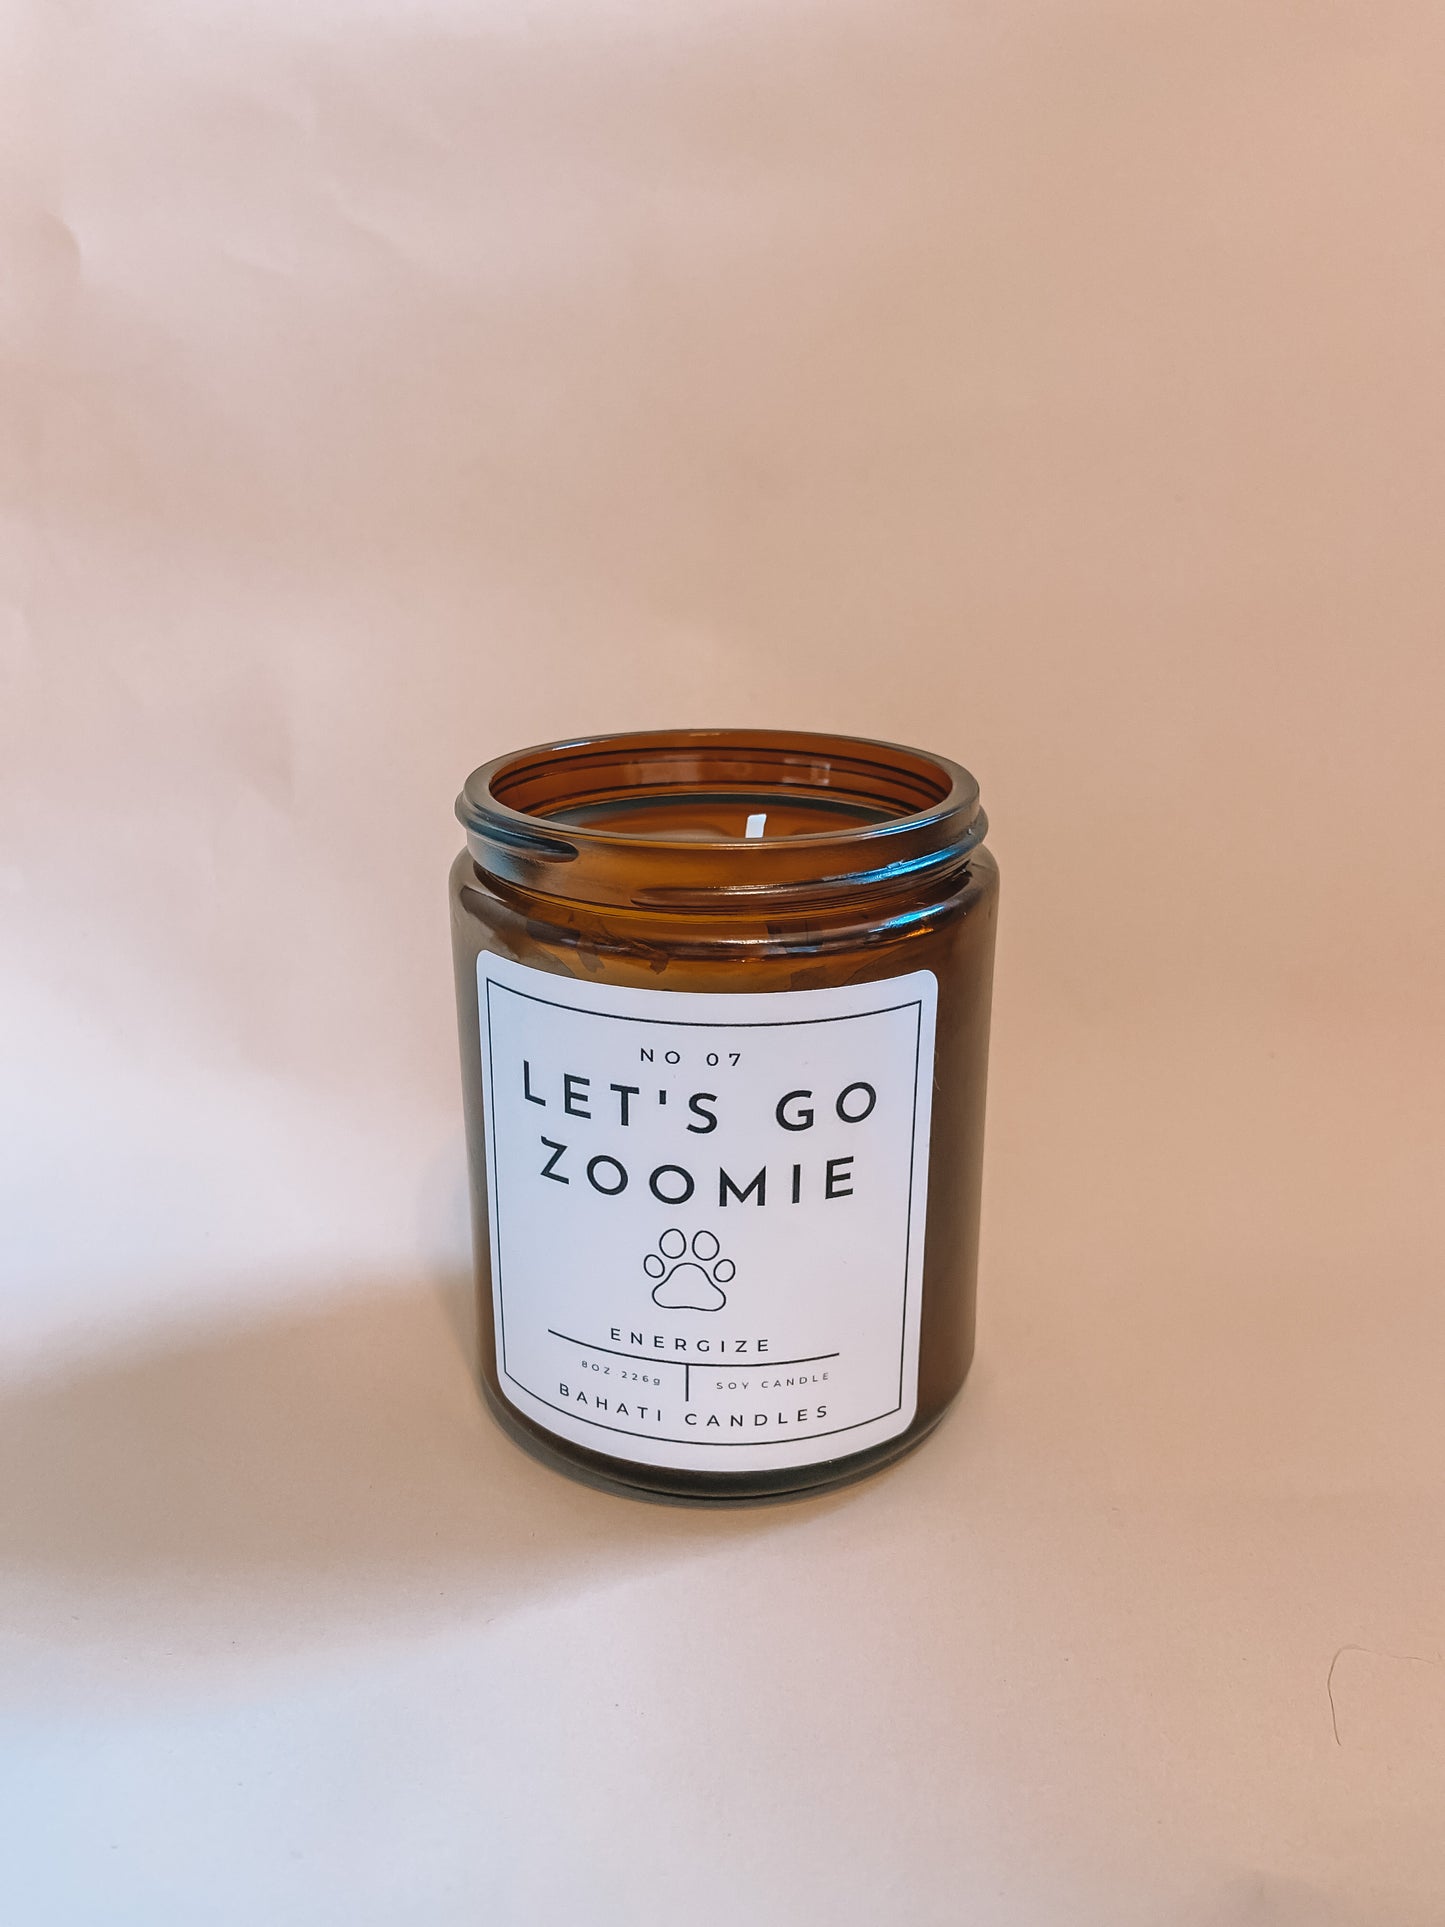 Let's Go Zoomie- 8 ounce candle